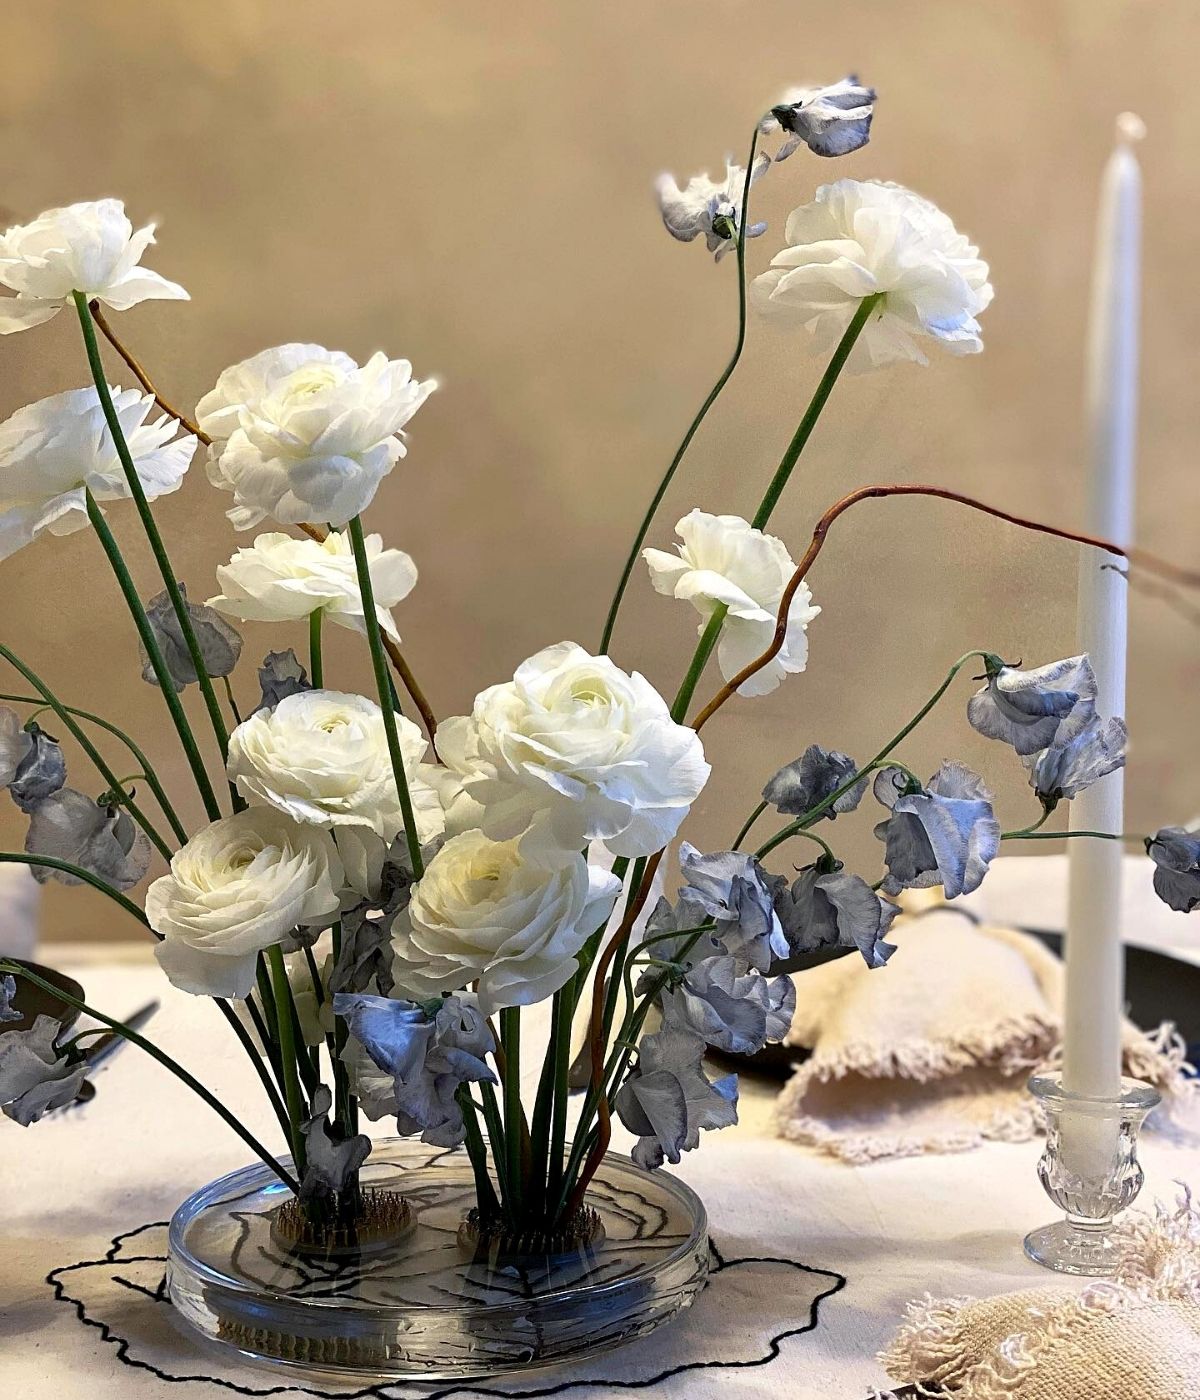 Table Setting With White Ranunculus in Ikebana Style by Rachel Clark